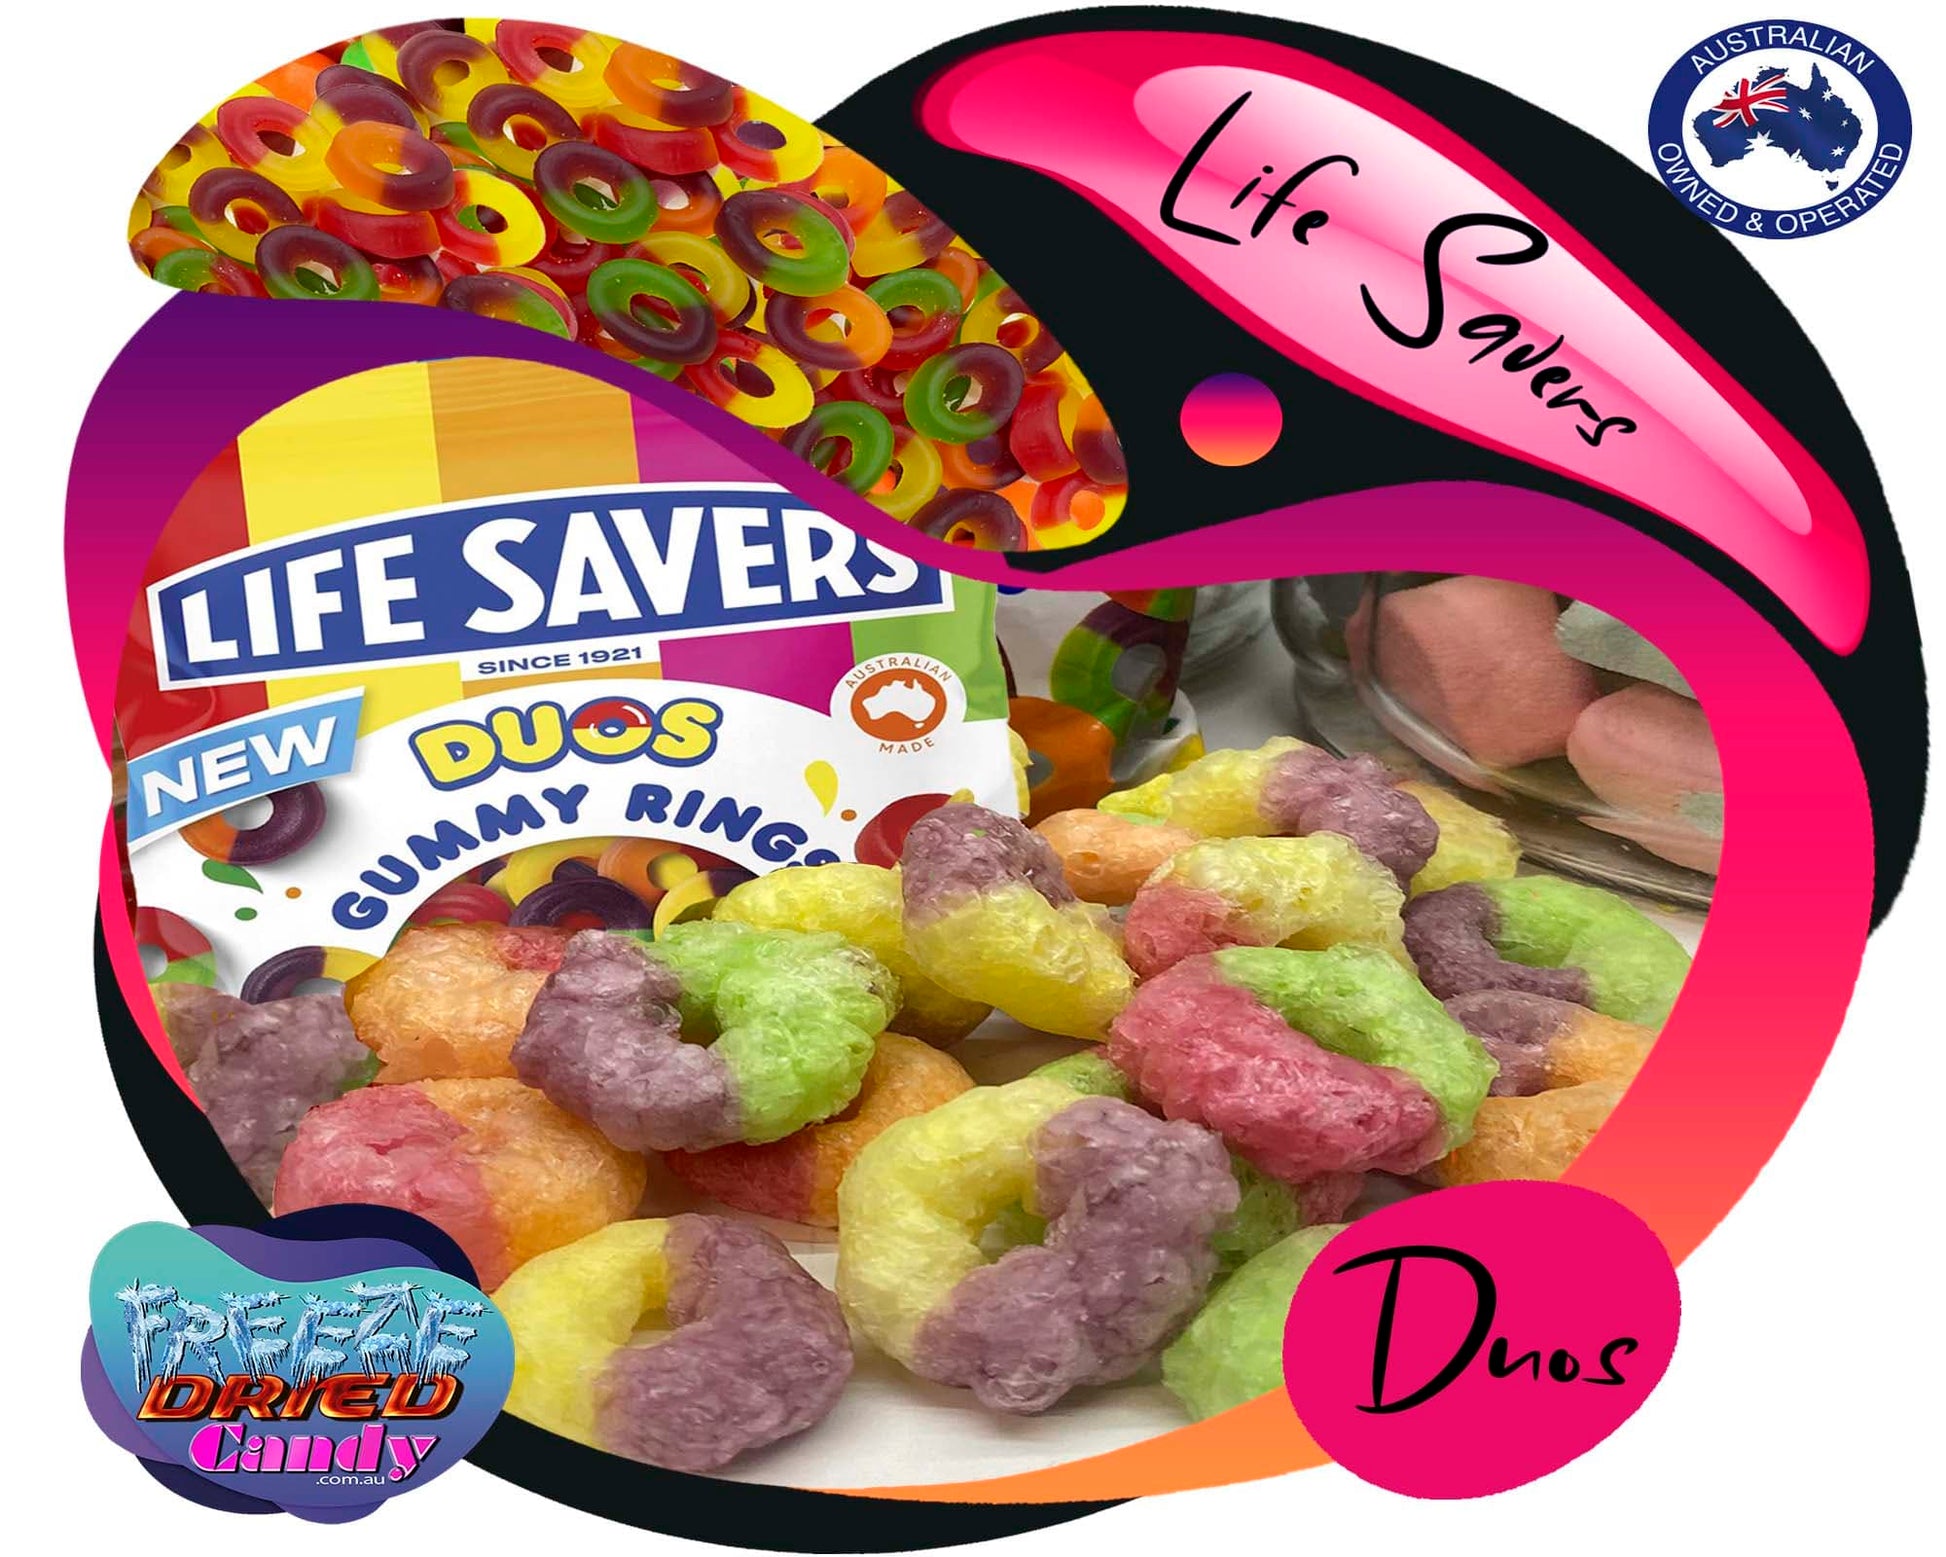 Buy online Freeze Dried Life Saver Gummi Duos - Freeze Dried Candy Lollies Awaken your taste buds and savour twice the flavour with our Freeze Dried Life Savers® Duos Rings. The delicious double flavour duos of raspberry, pineapple, blackcurrant, orange, and watermelon collide for more mouth-watering fun. Enjoy each flavour on its own, or combine together to make a whole new flavour!